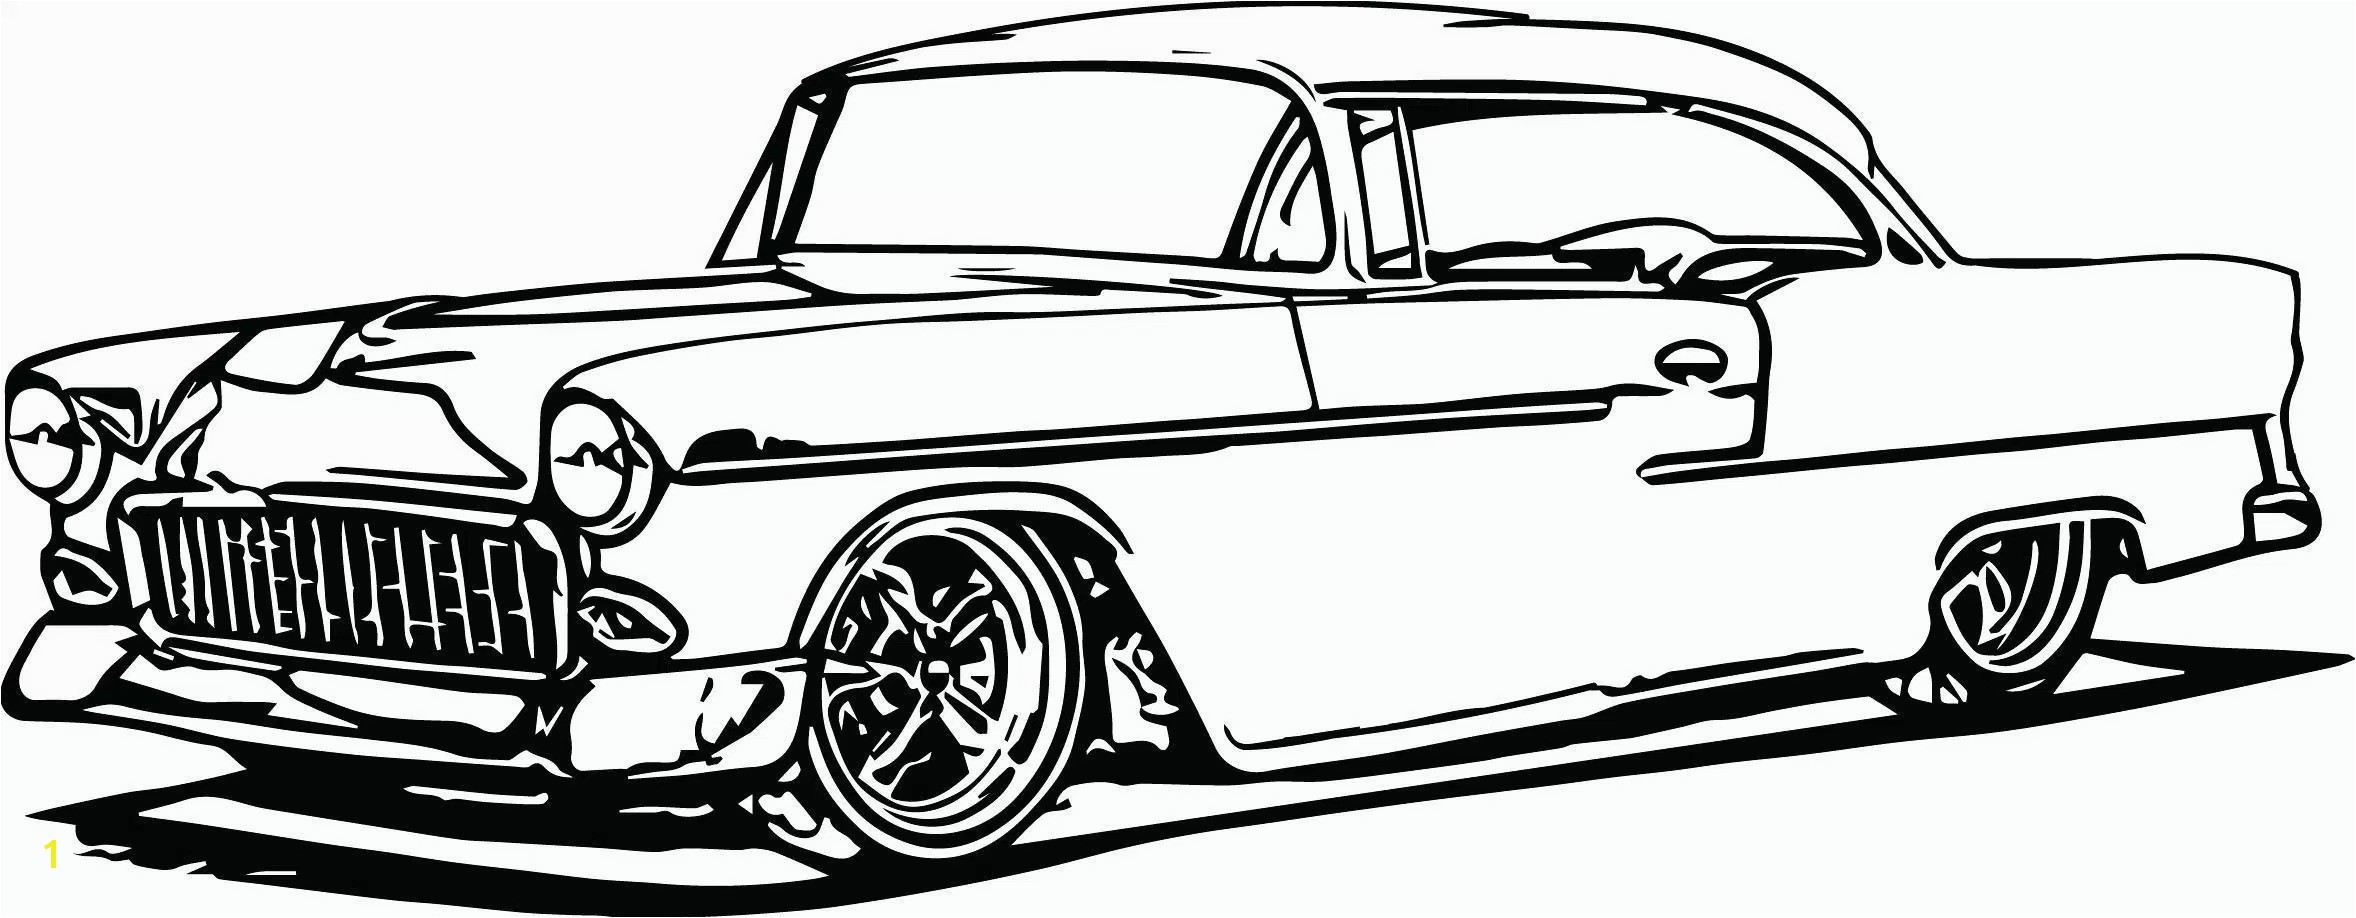 Coloring Pages Muscle Cars Muscle Car Coloring Pages Save Cars Coloring Books Inspirationa